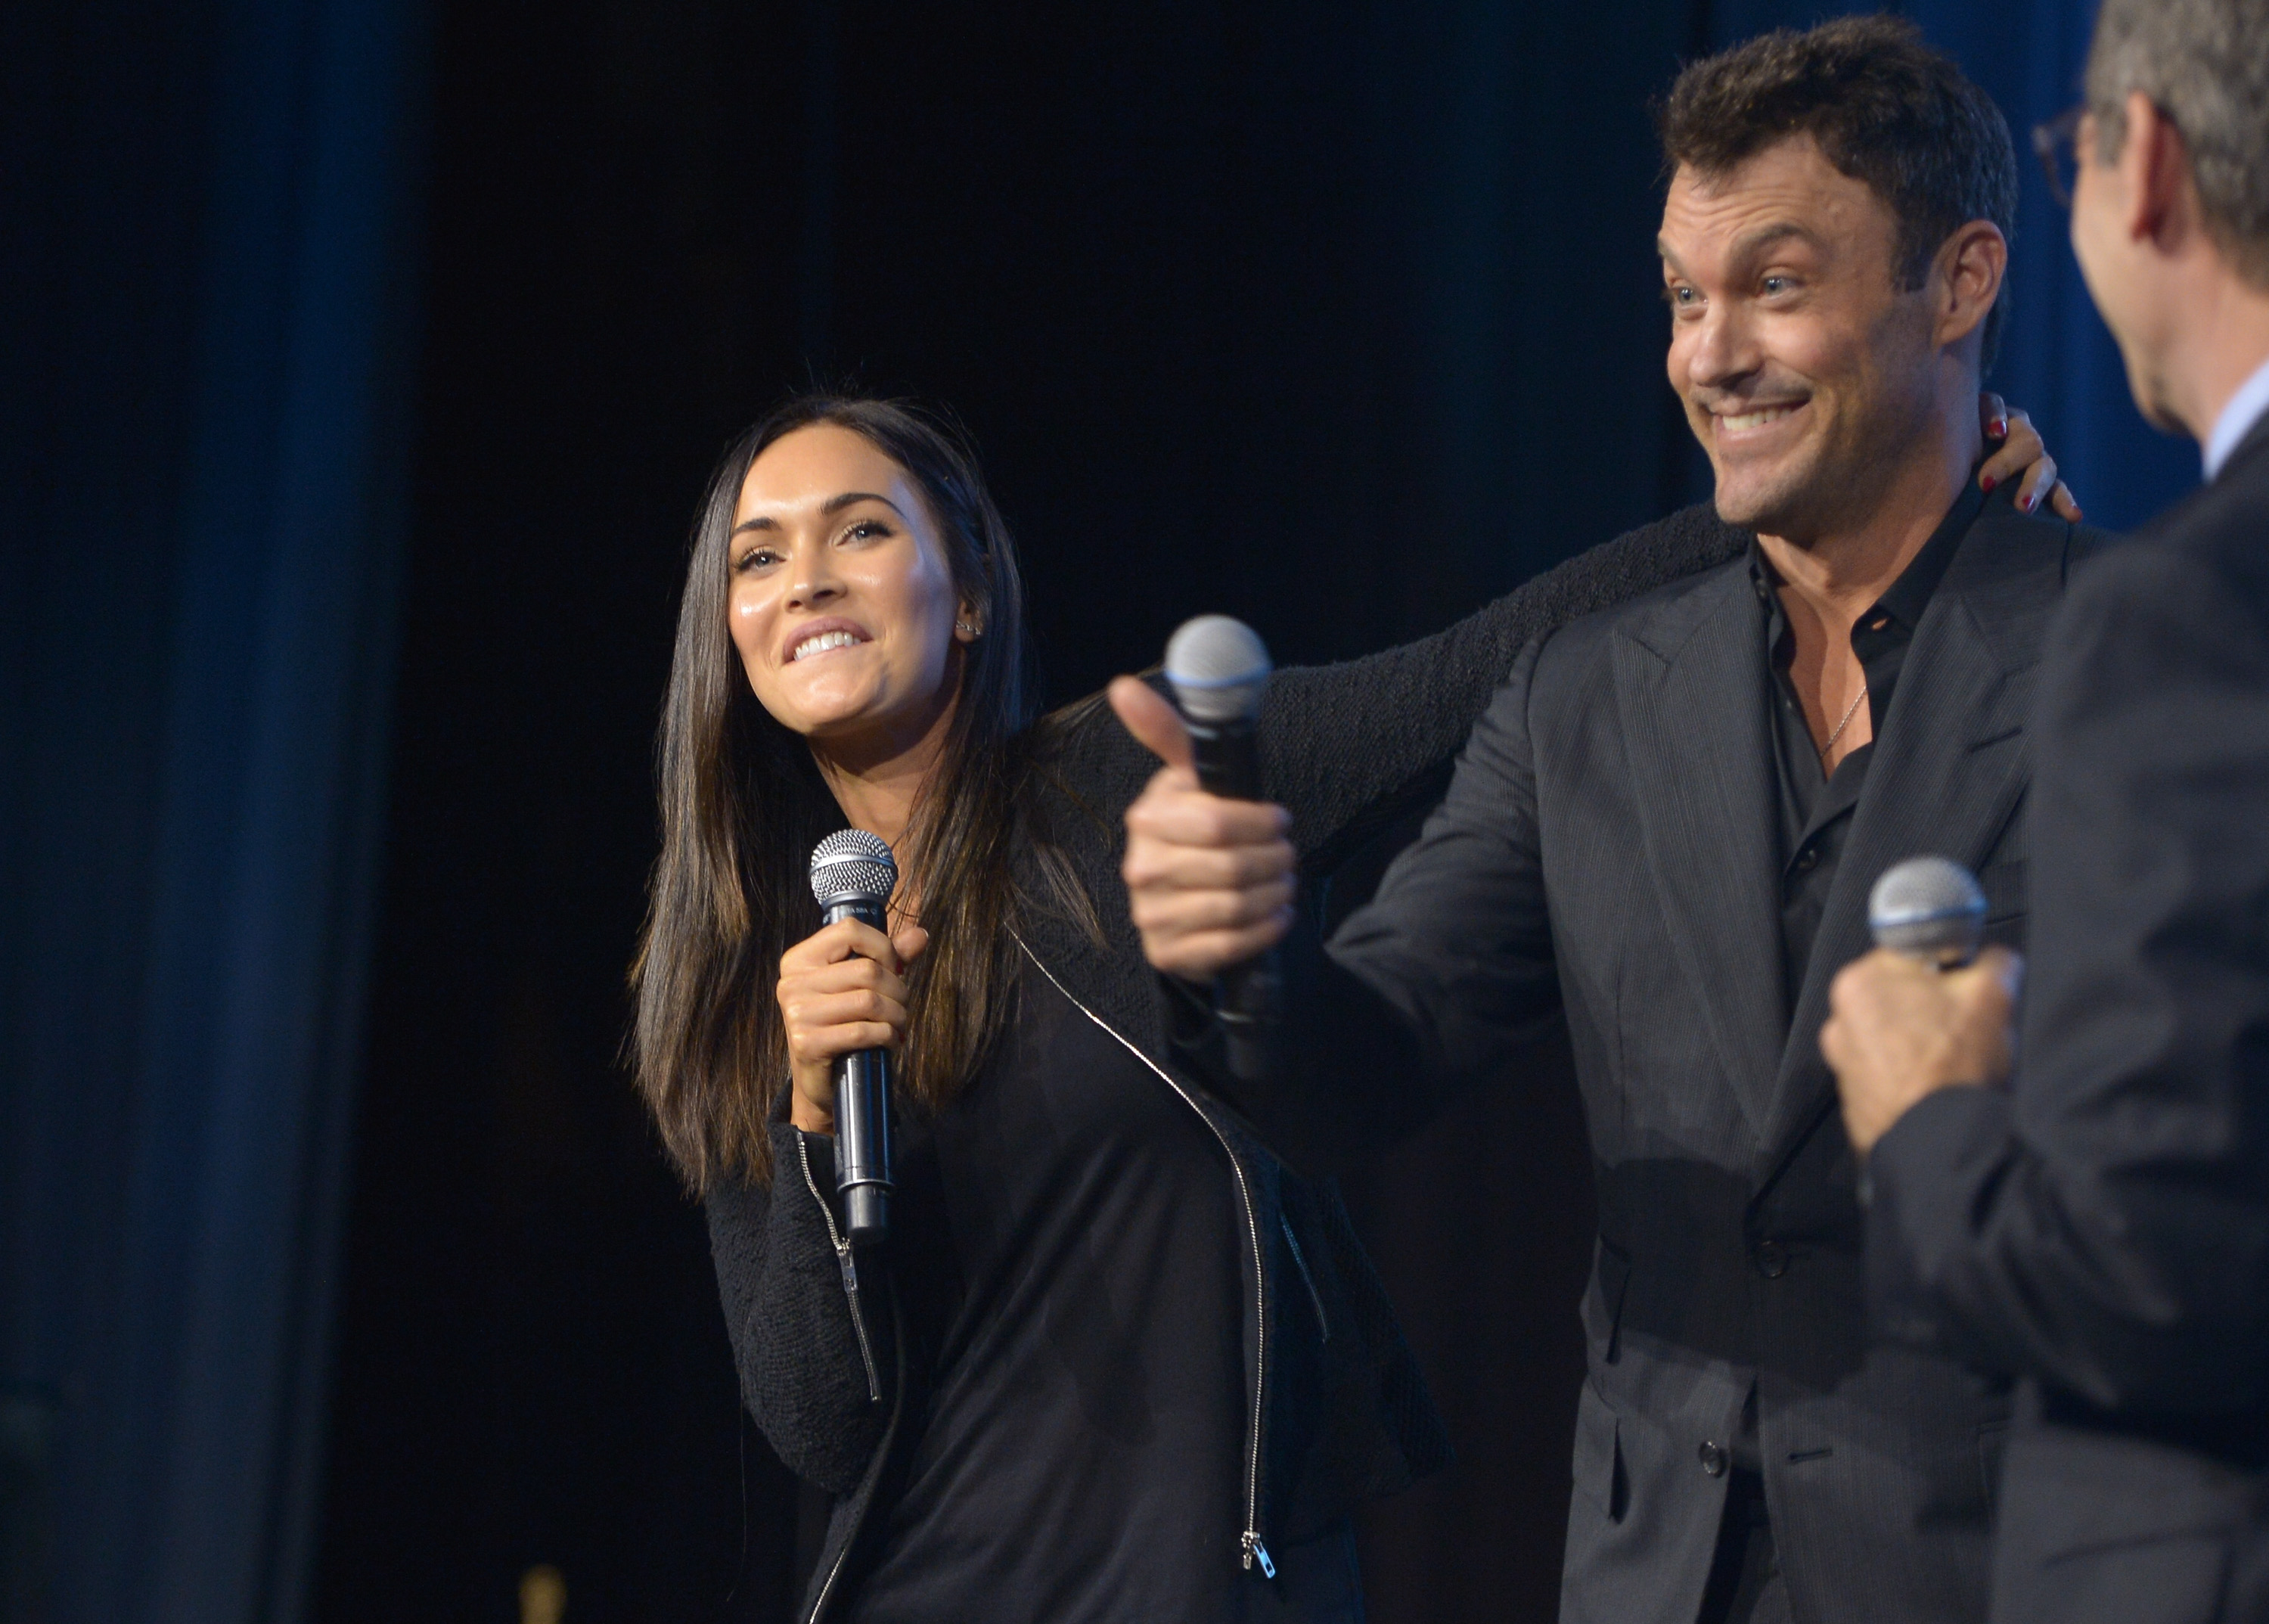 Megan Fox and Brian Austin Green during the 6th Annual Night of Generosity Gala in Beverly Hills, California on December 5, 2014 | Source: Getty Images